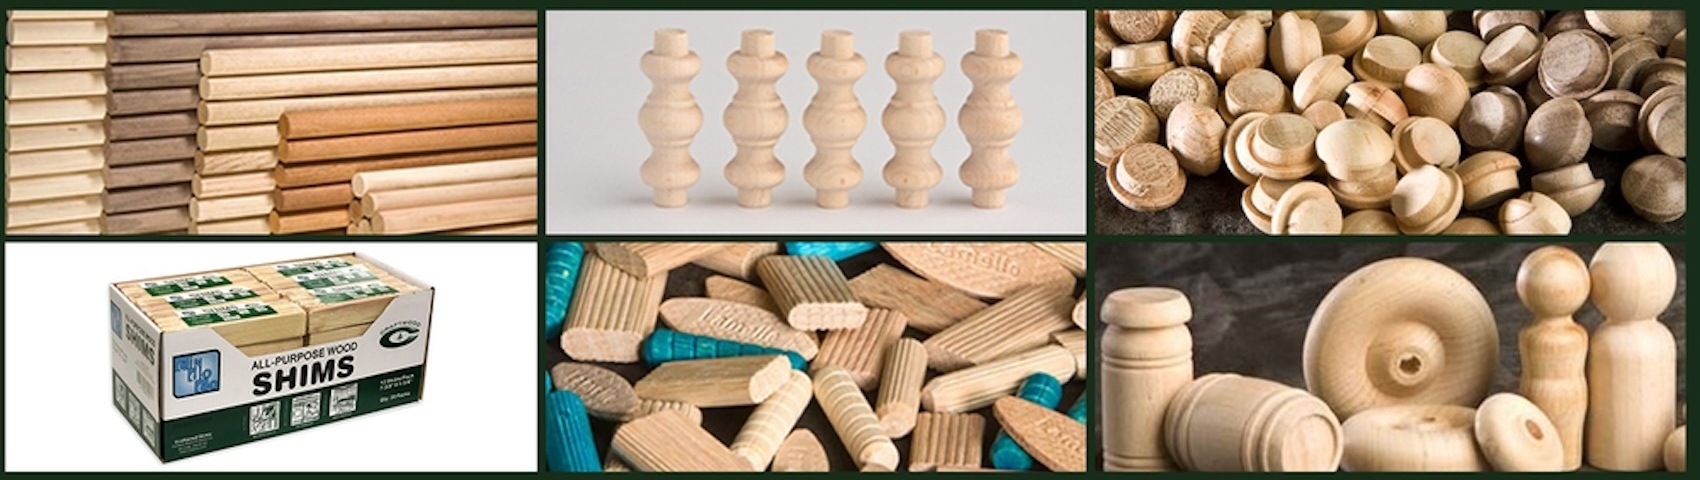 Collage of wood dowel products